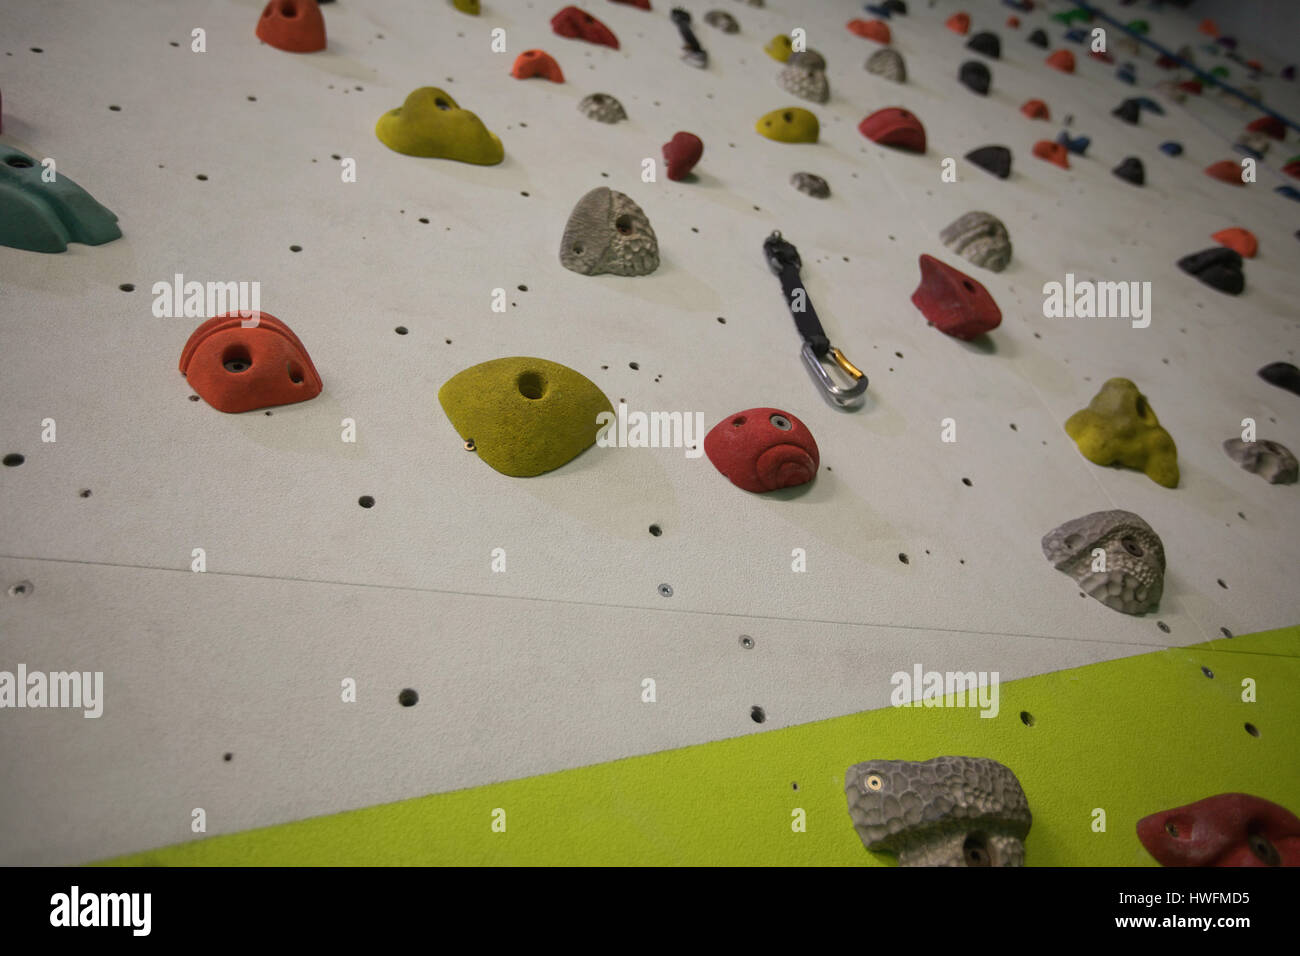 Artificial climbing wall in gym for practice Stock Photo